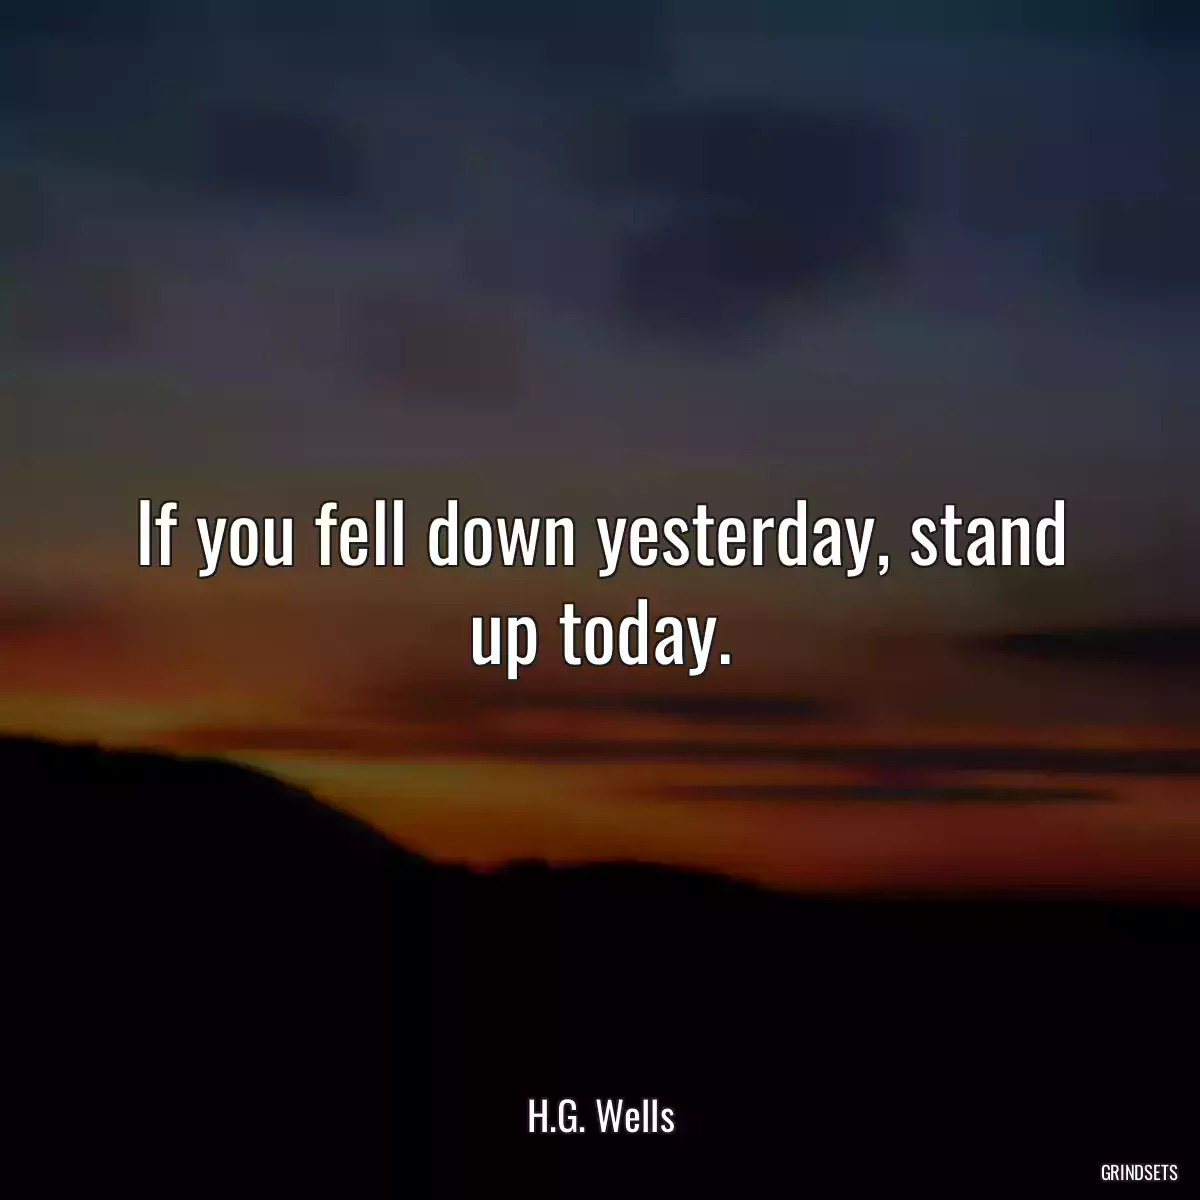 If you fell down yesterday, stand up today.